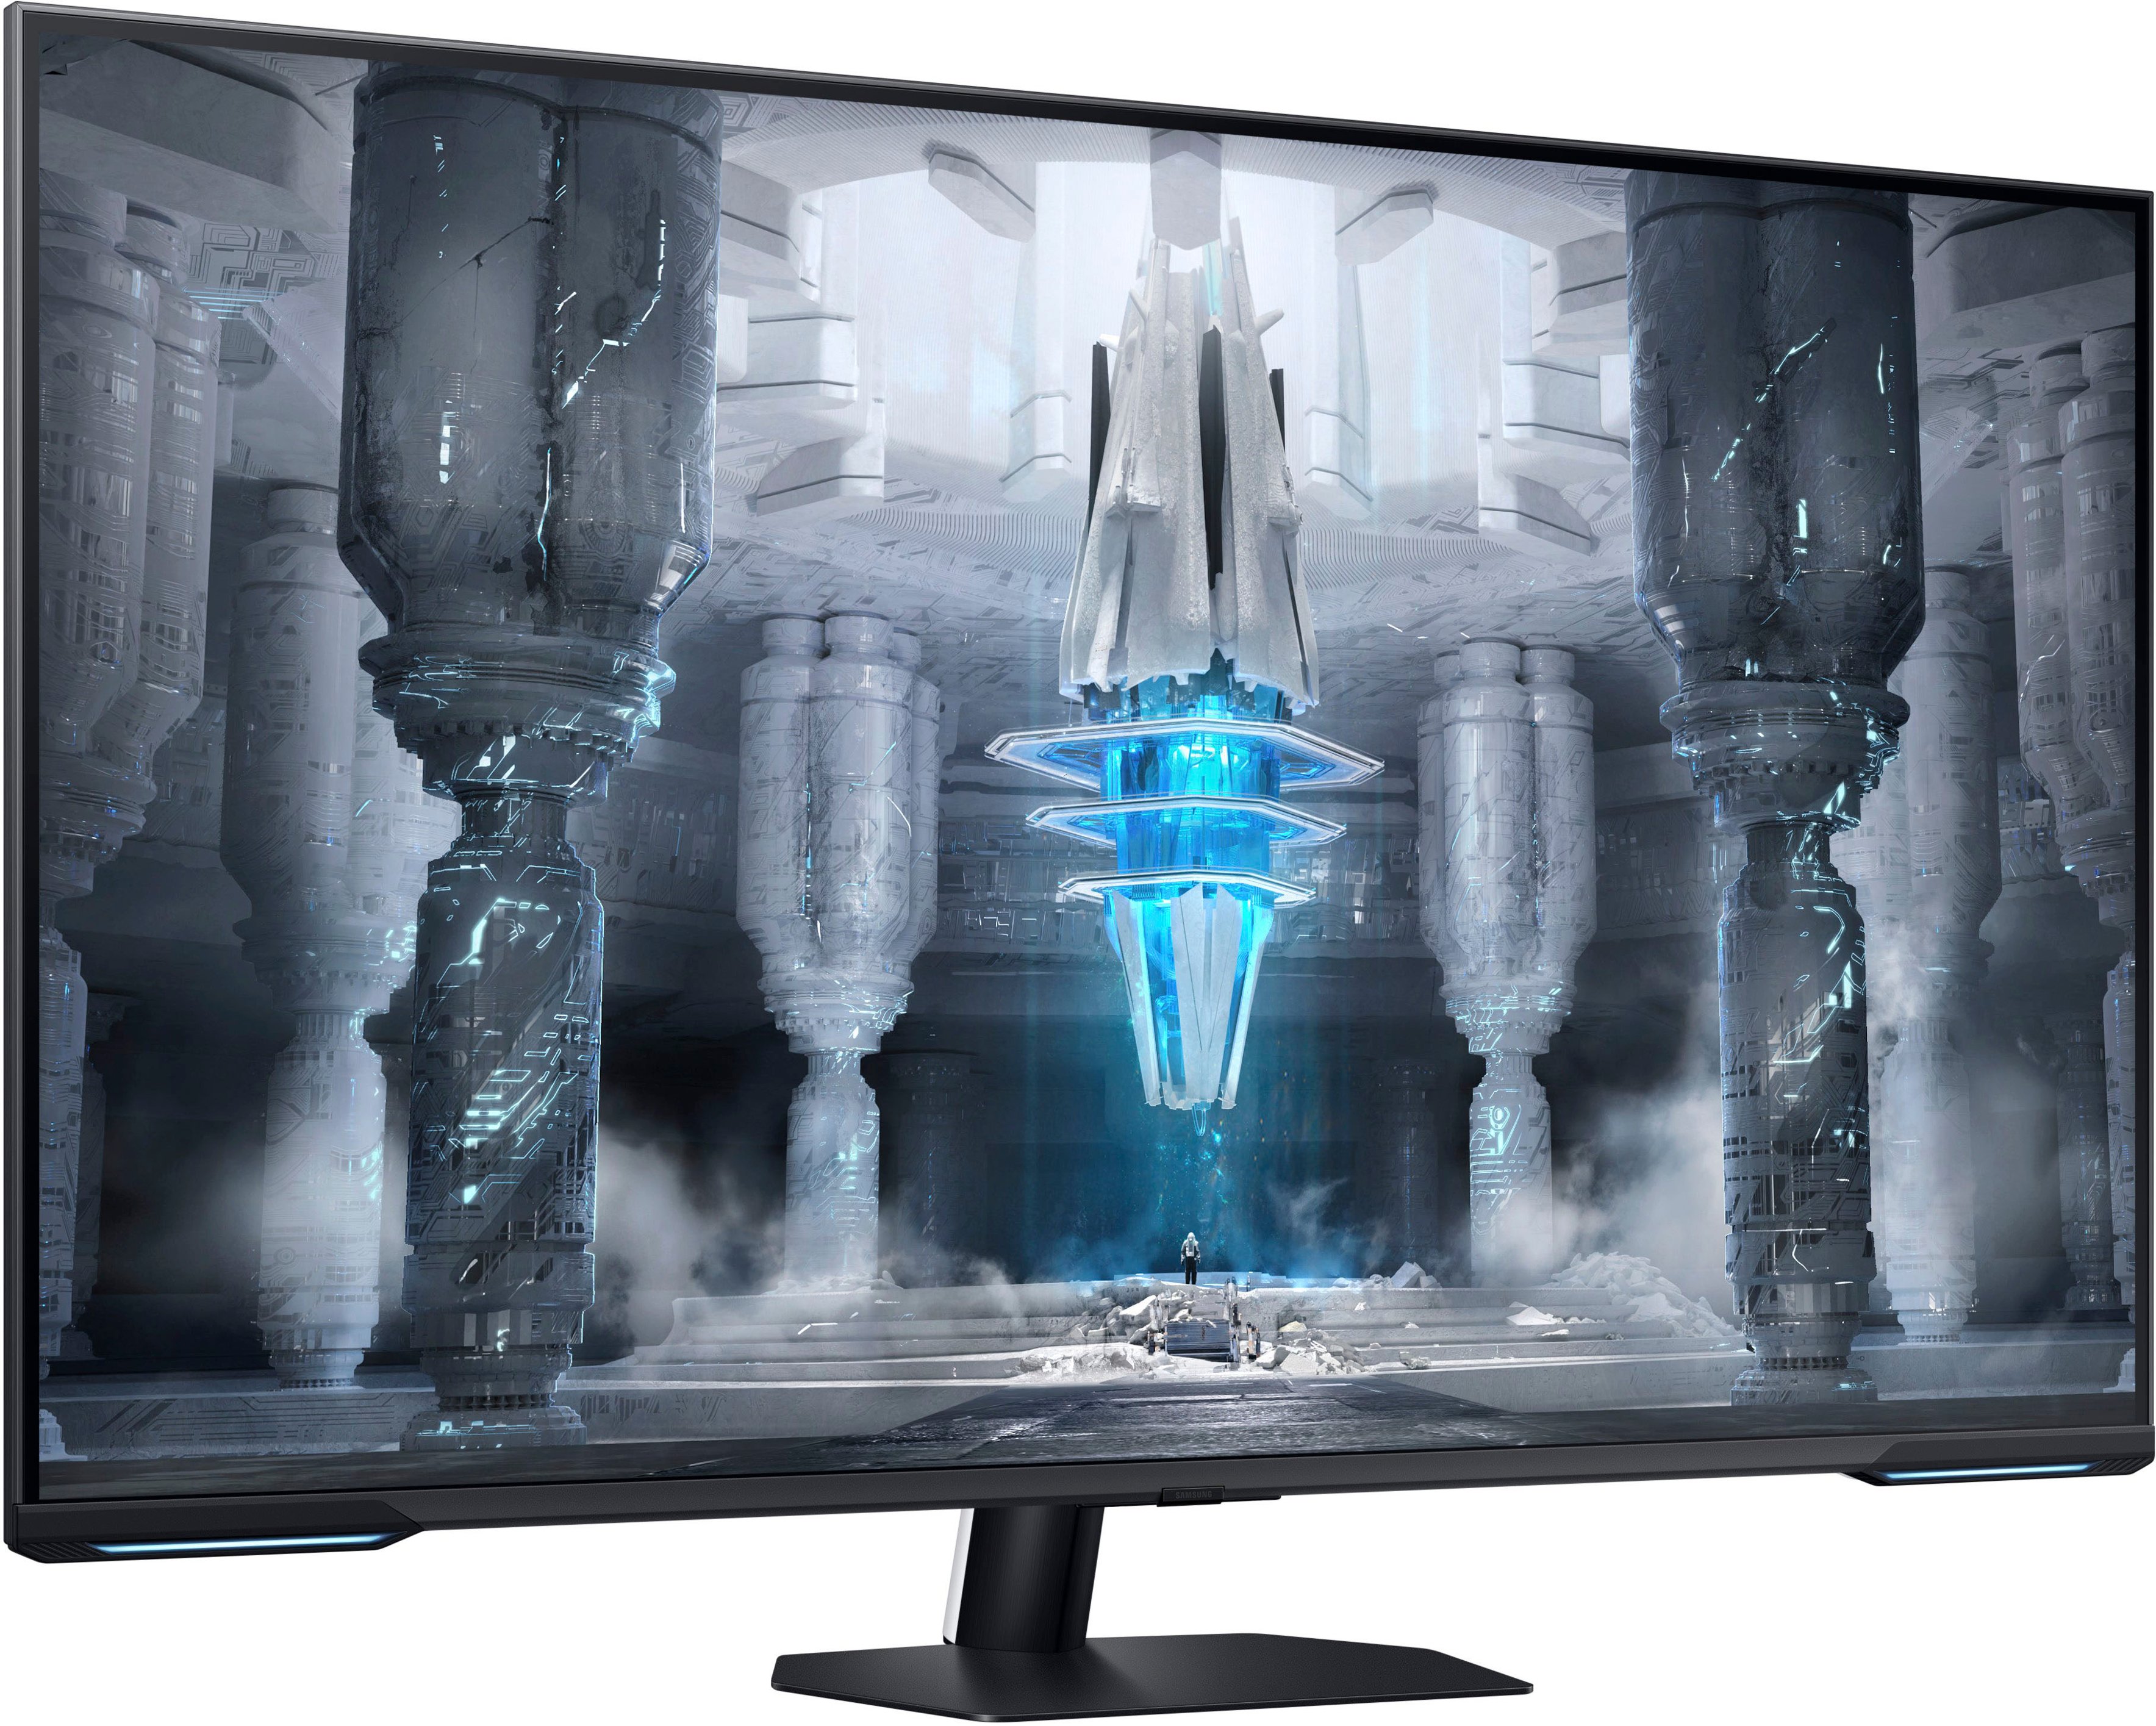 i need a 32 inch monitor, atleast 120hz refresh rate, resolution